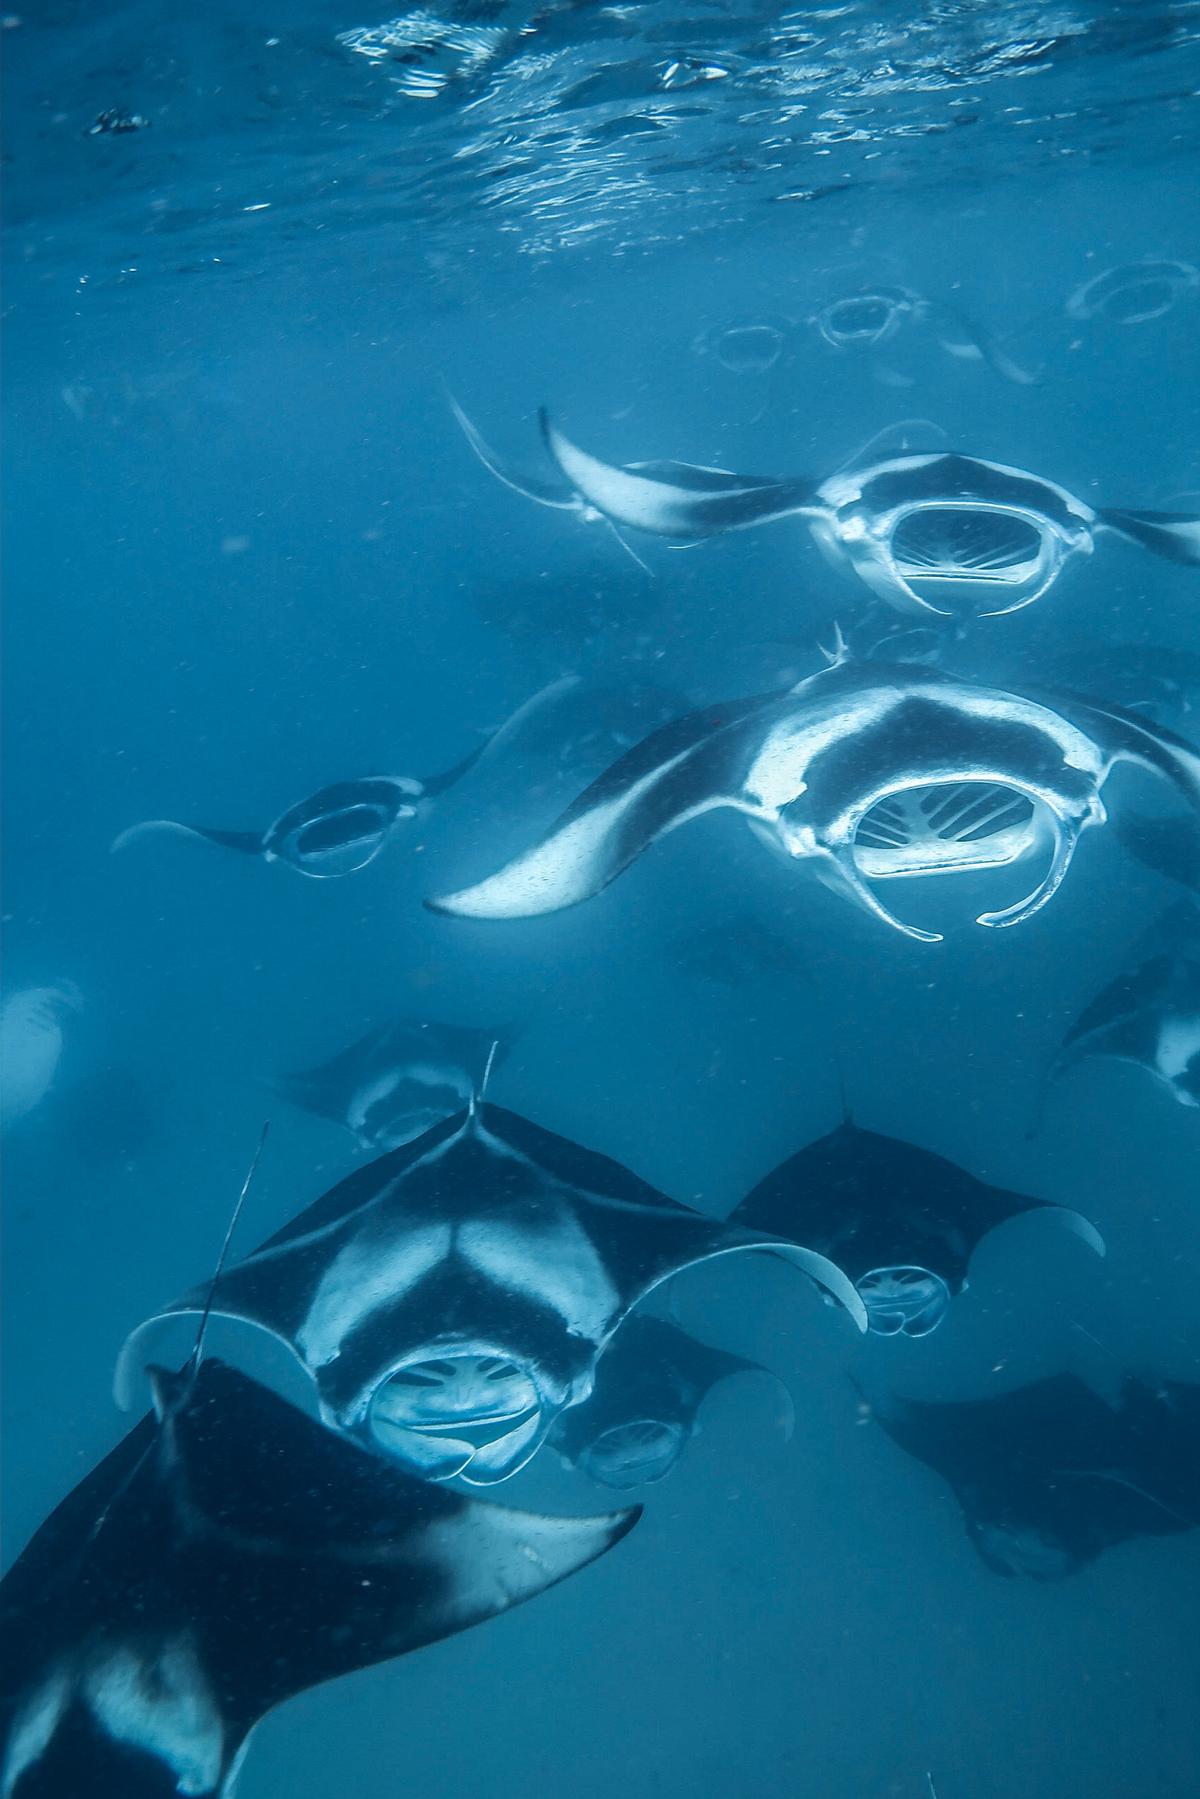 The best time to plan a manta spotting visit is between the months of June and November